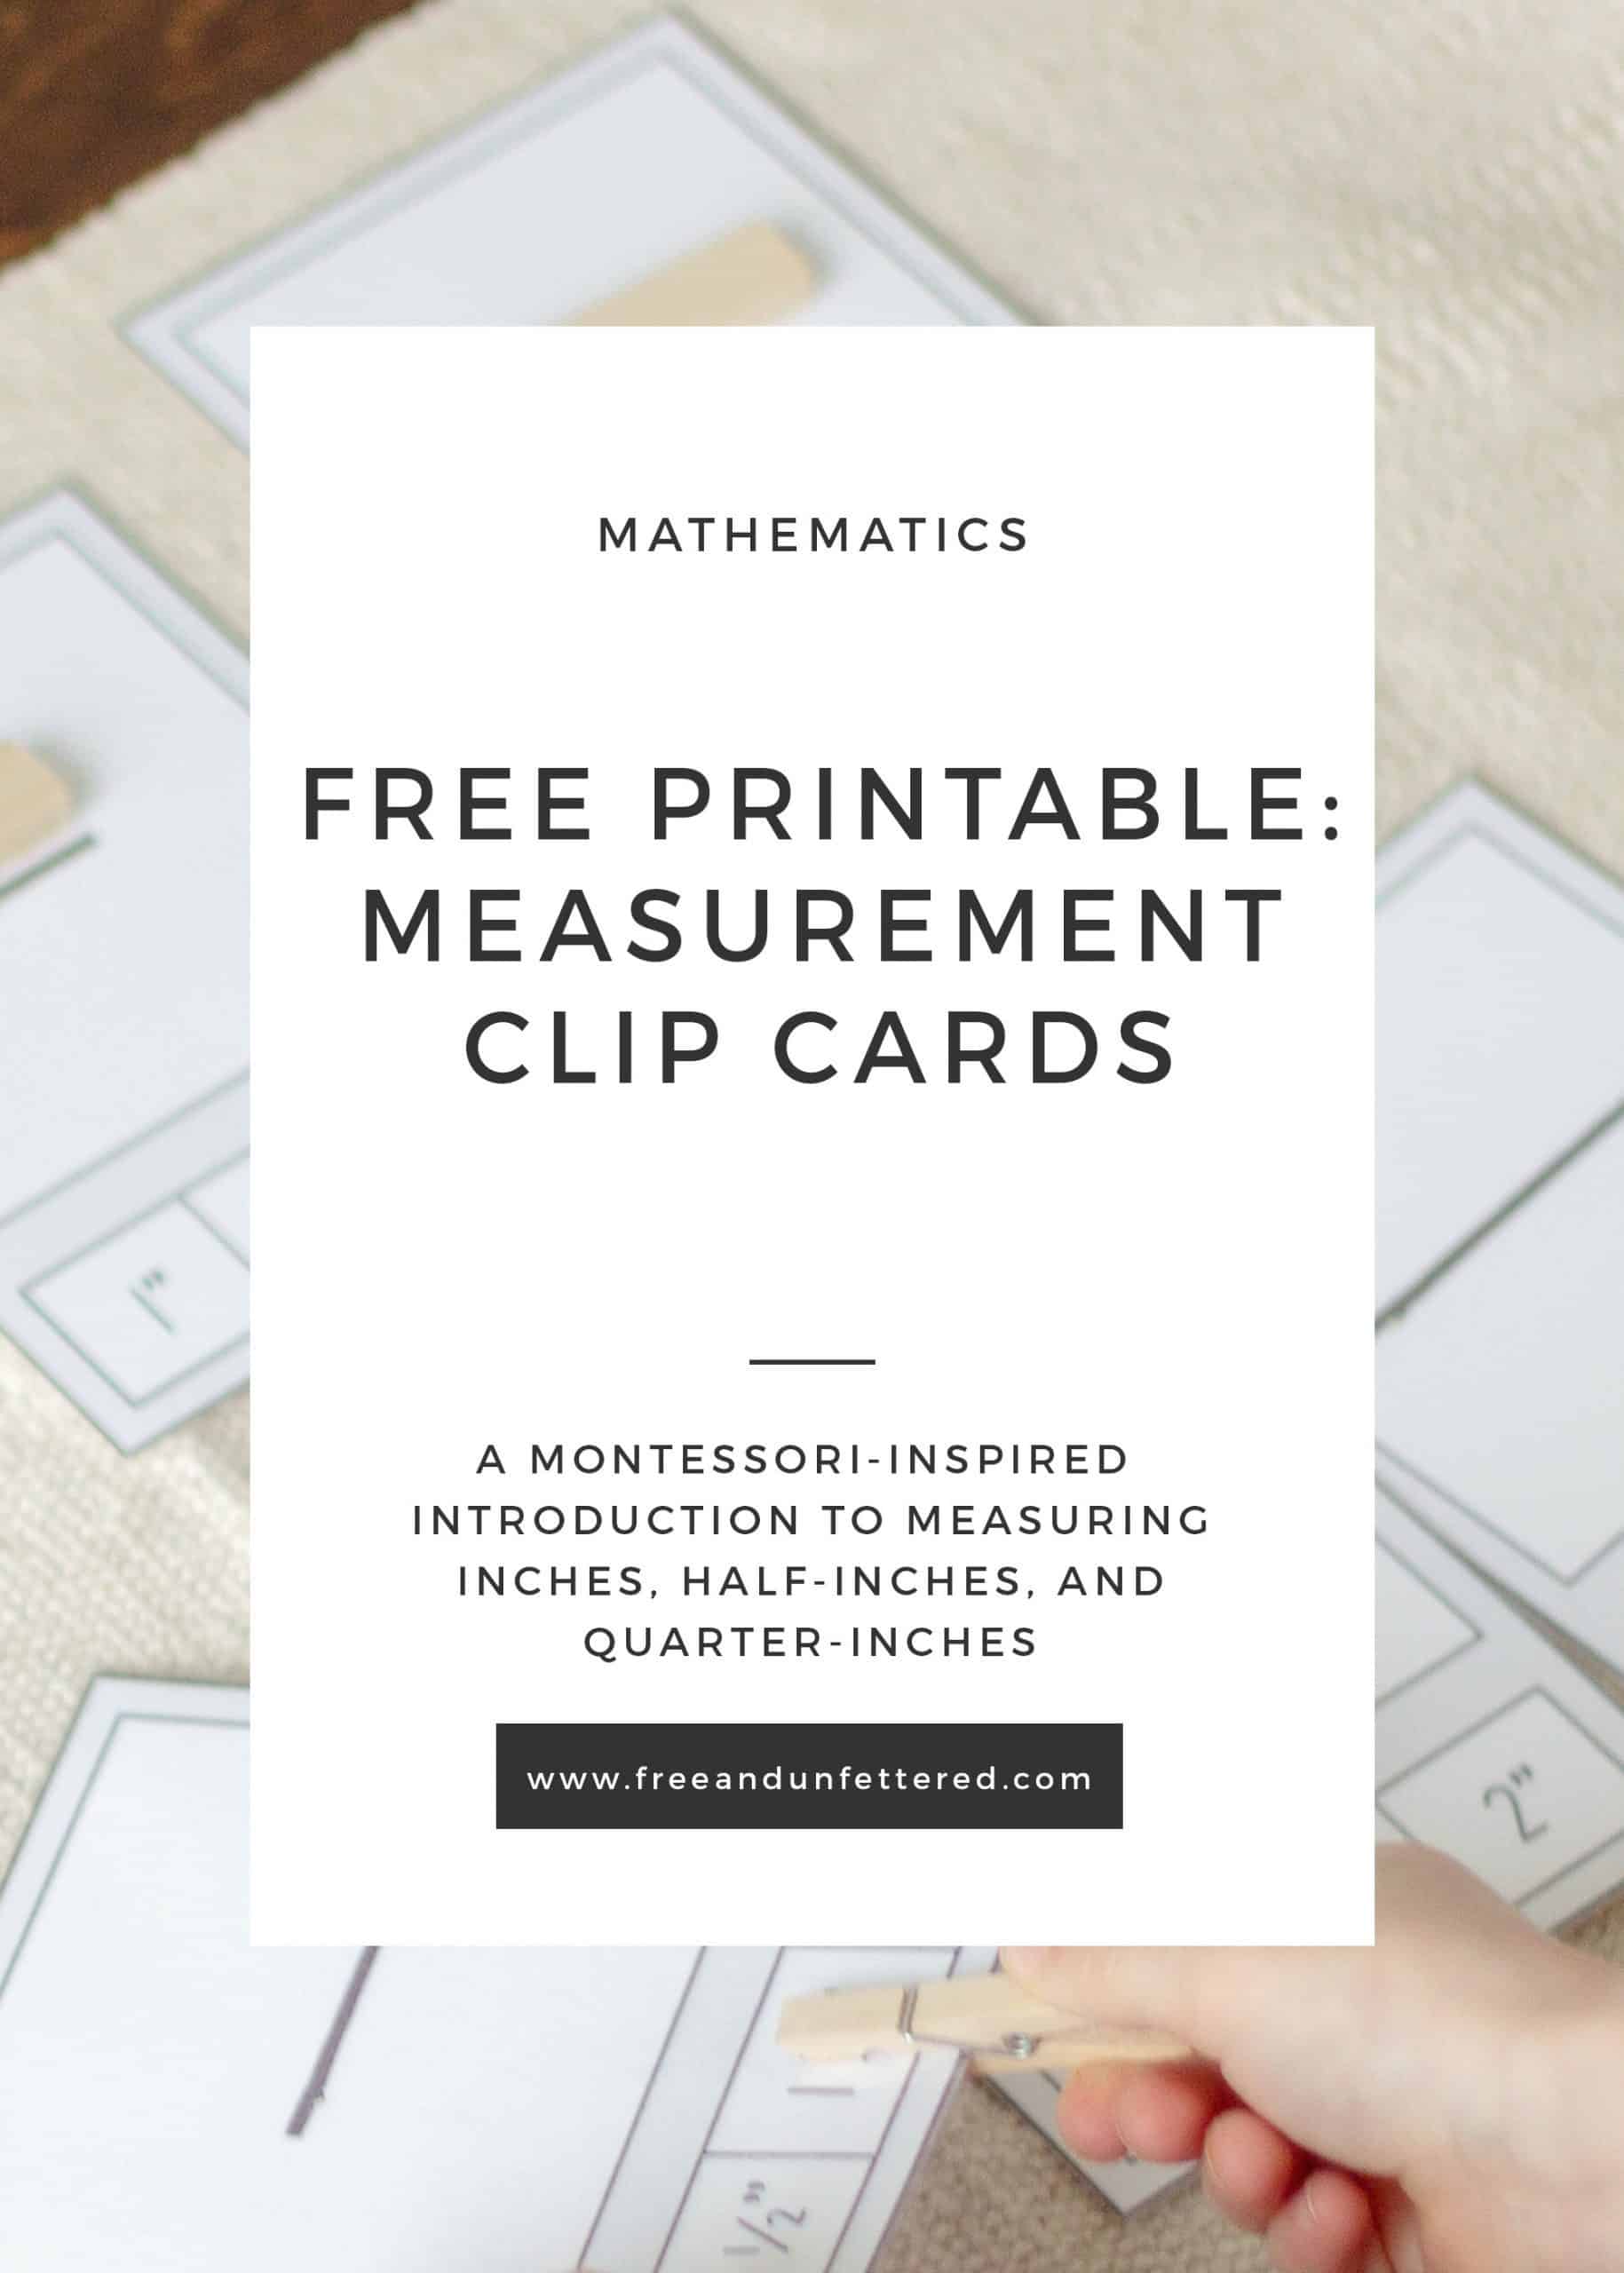 Free printable: measurement clip cards. A montessori-inspired introduction to measuring inches, half-inches, and quarter-inches.